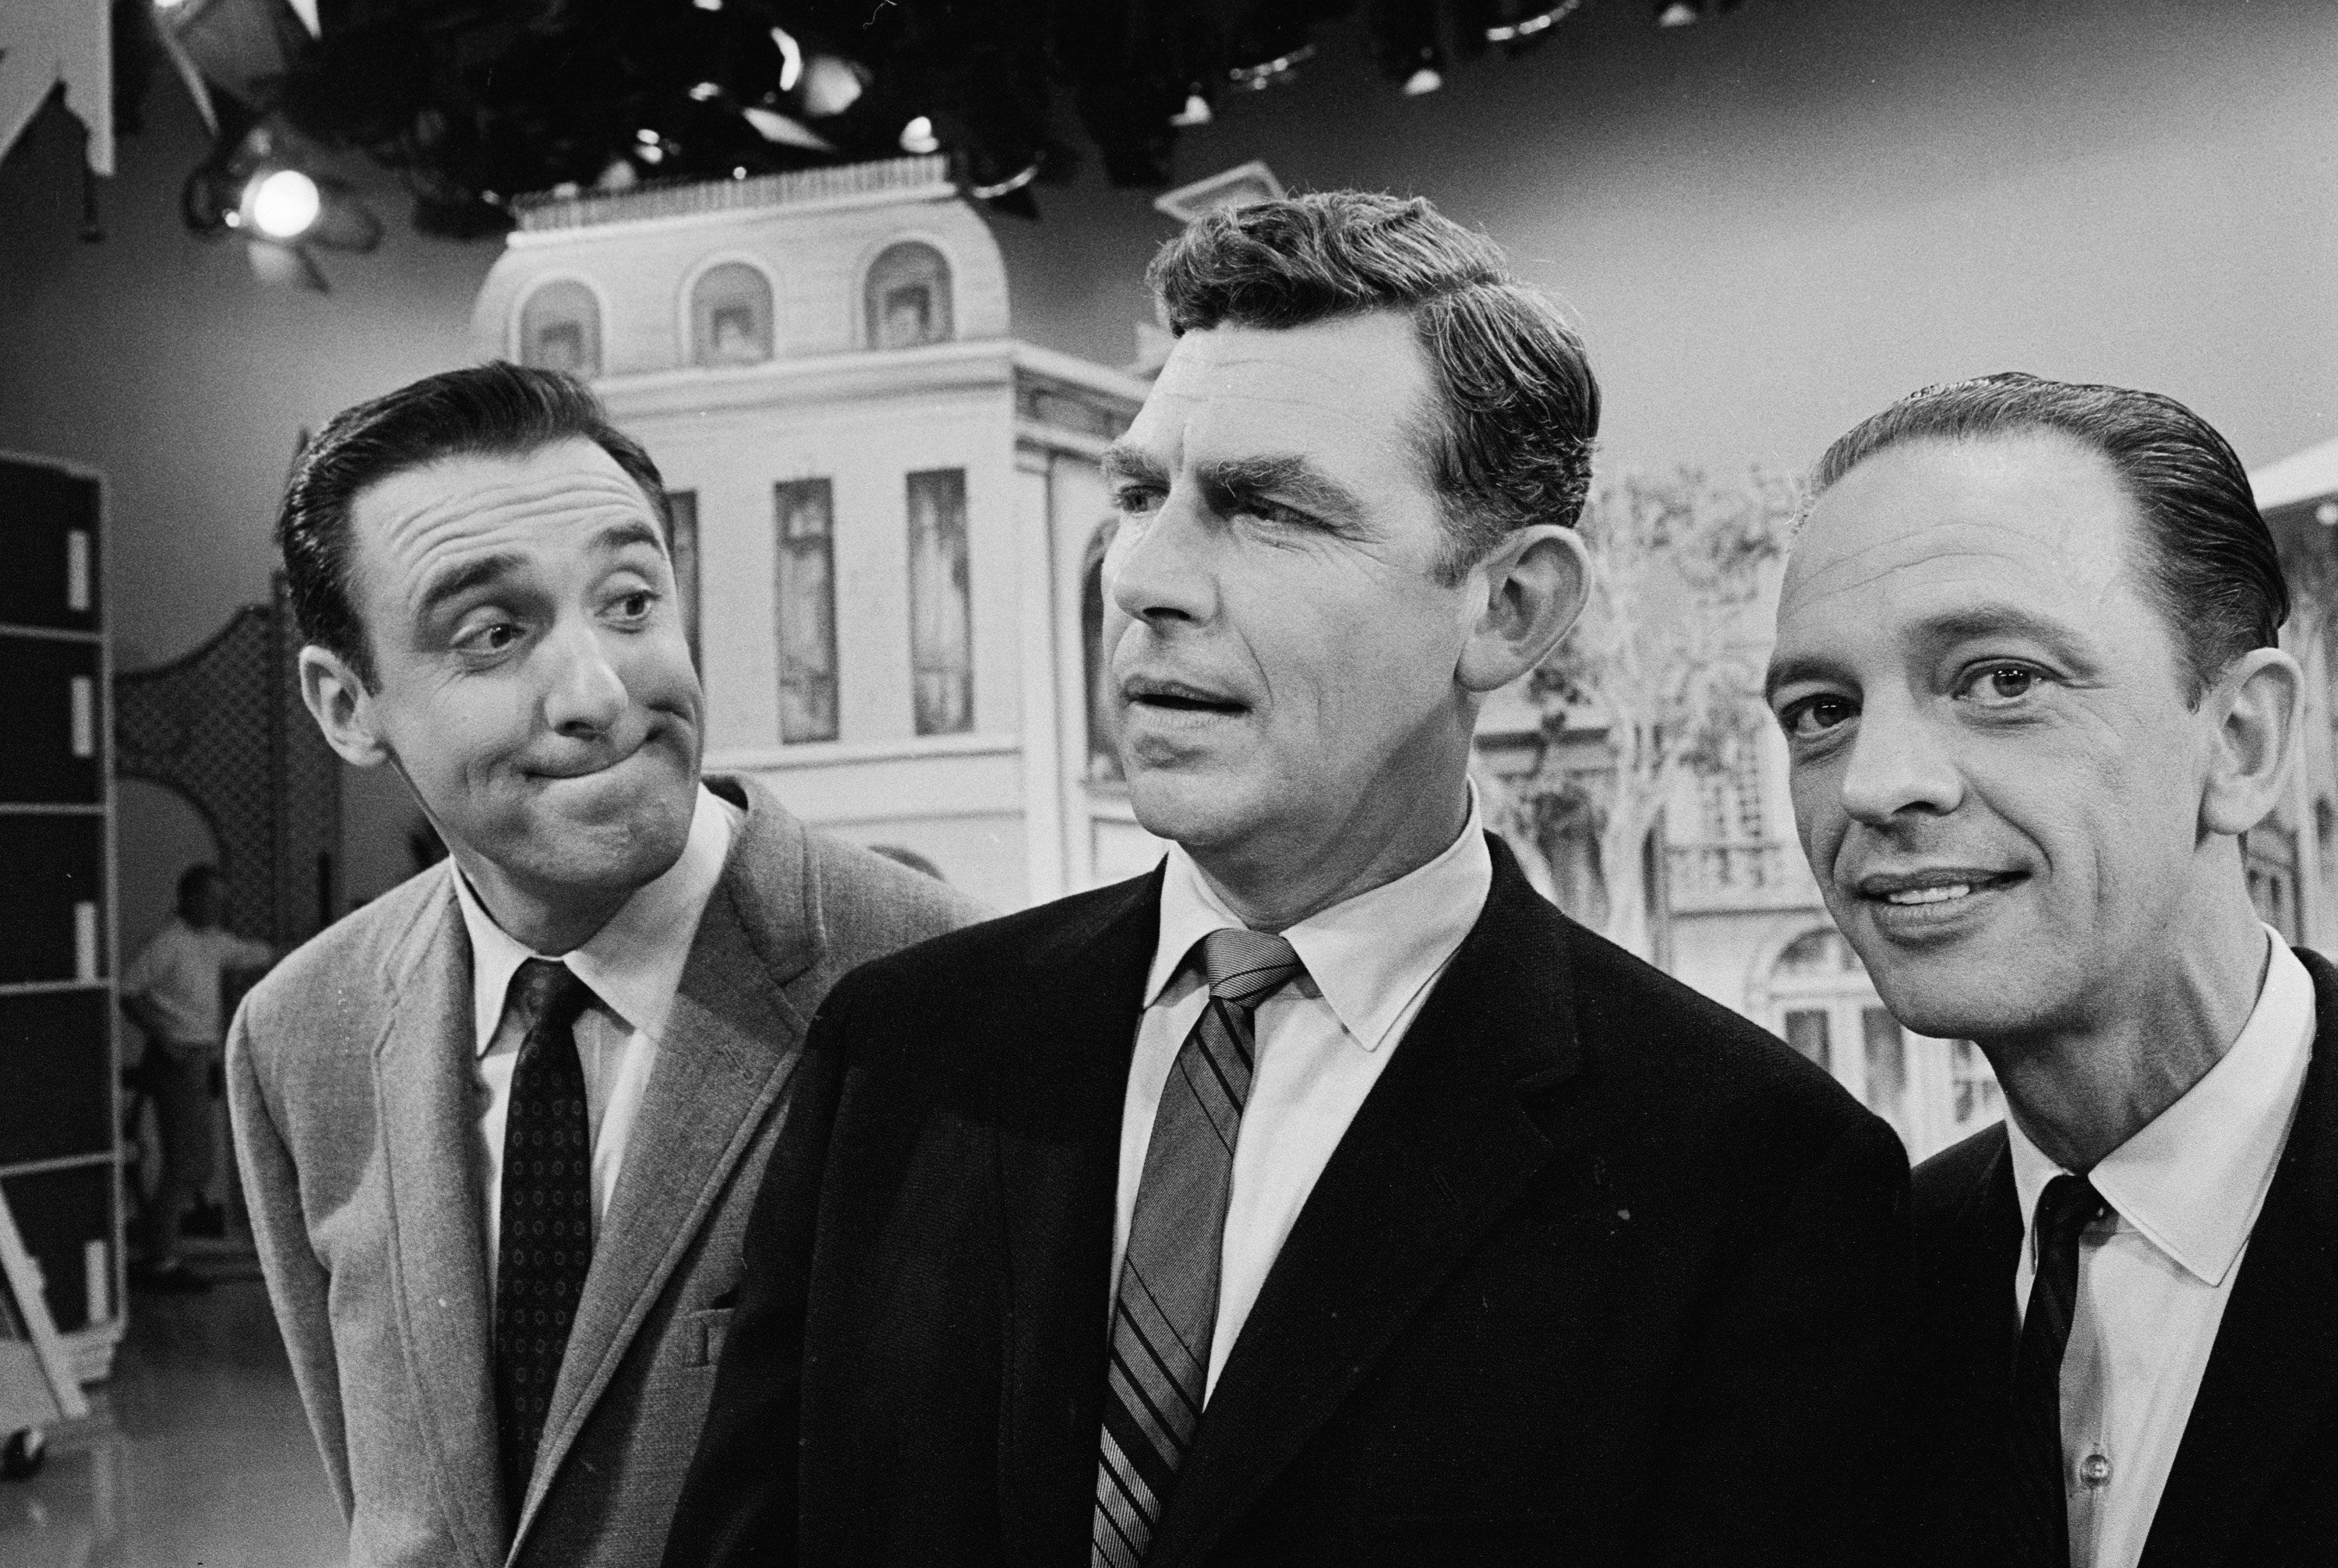 Jim Nabors, Andy Griffith, and Don Knotts of 'The Andy Griffith Show'